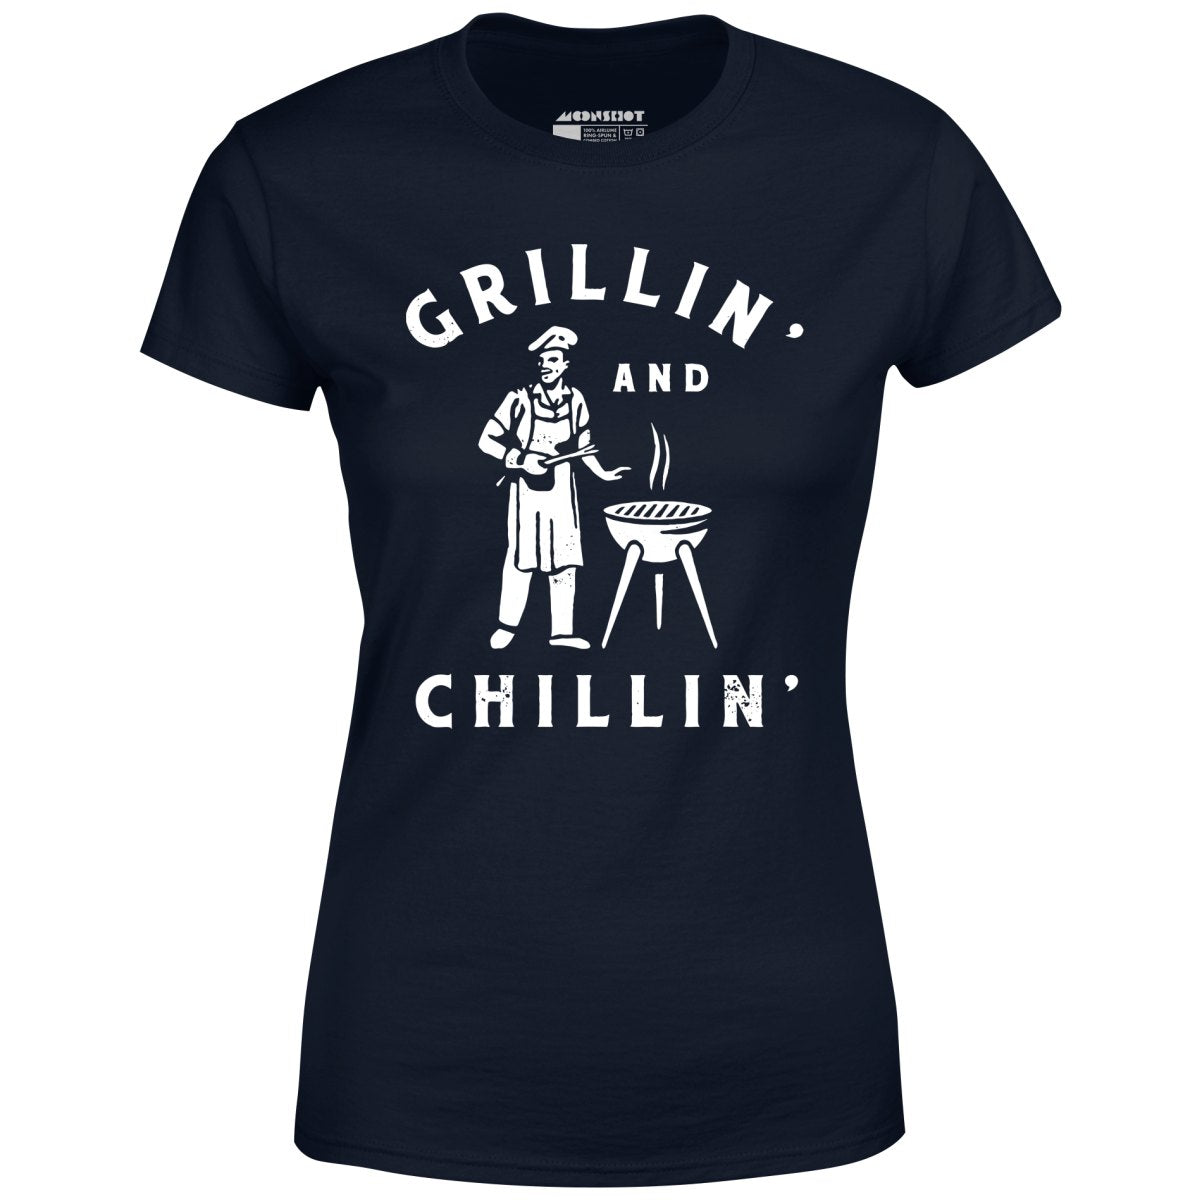 Grillin' and Chillin' - Women's T-Shirt